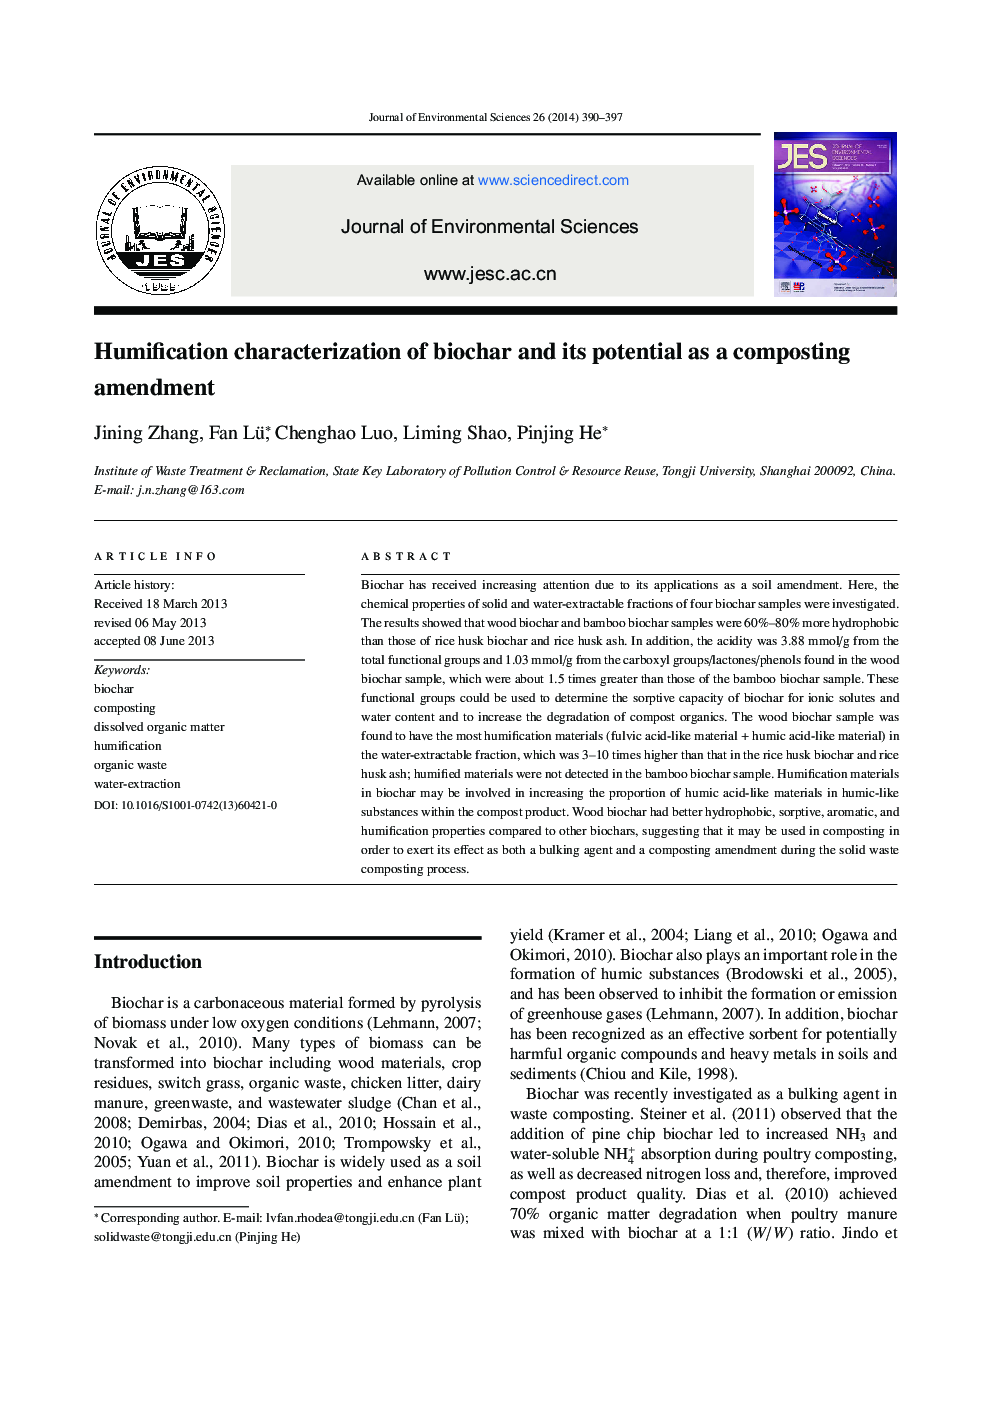 Humification characterization of biochar and its potential as a composting amendment